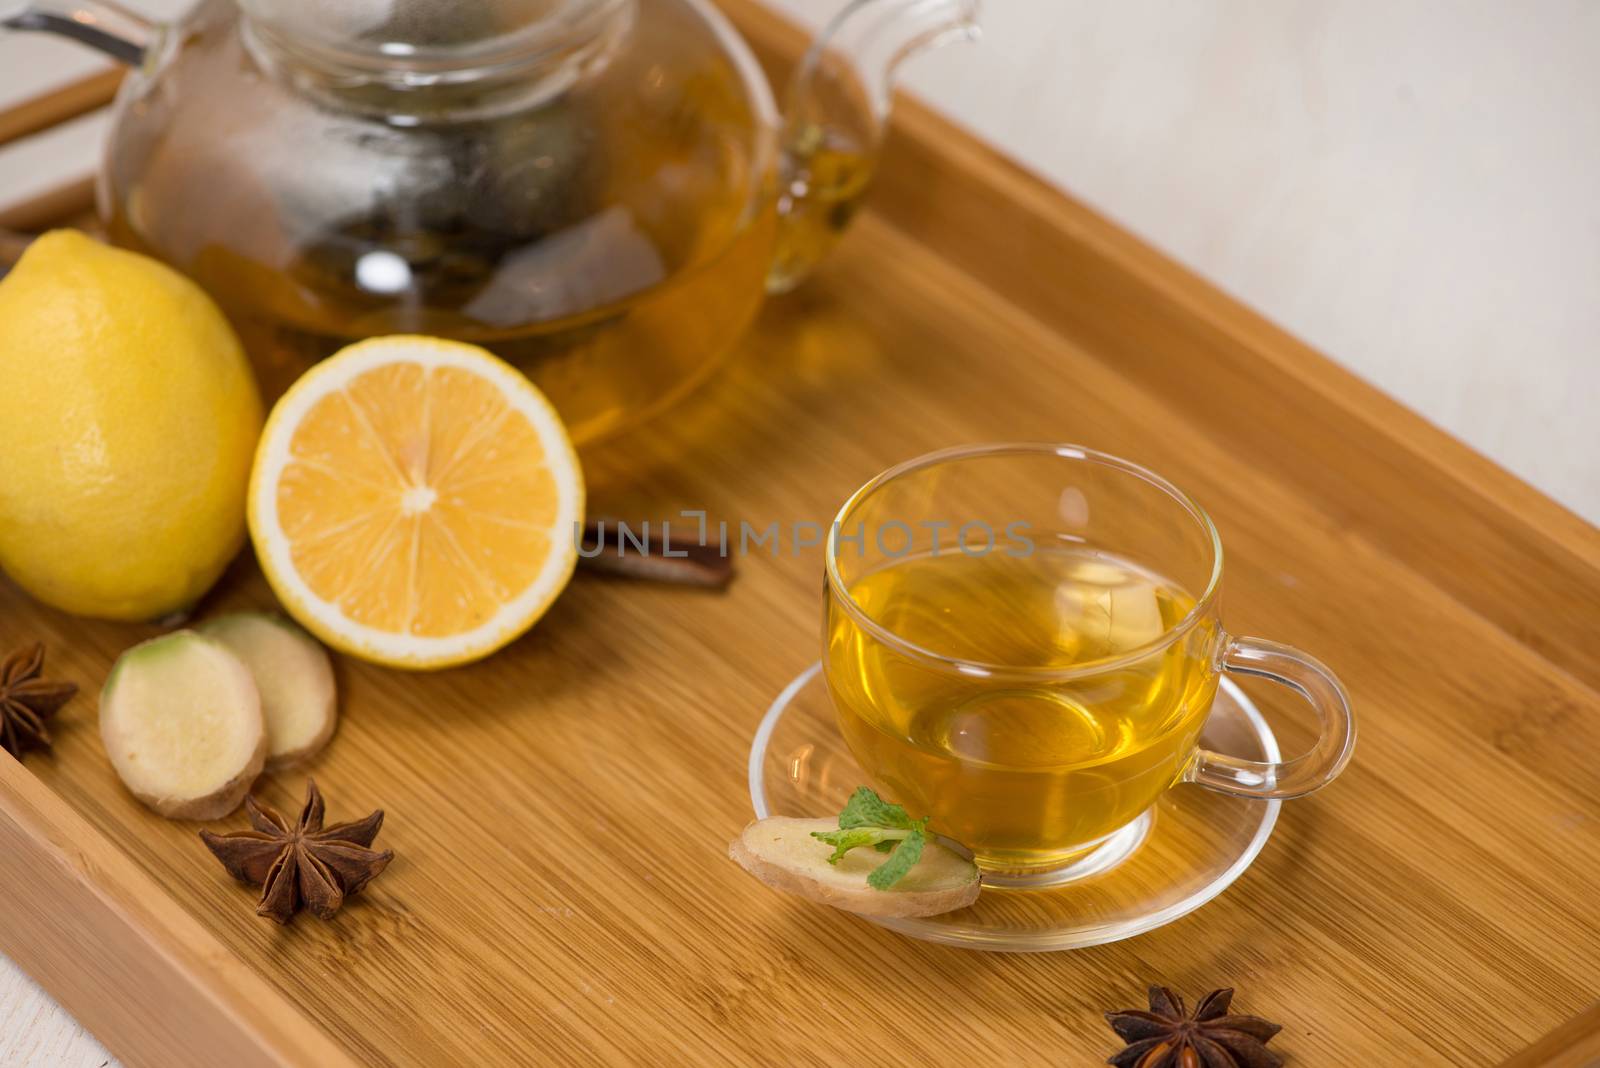 Cup of ginger tea with lemon and honey on white wooden background.